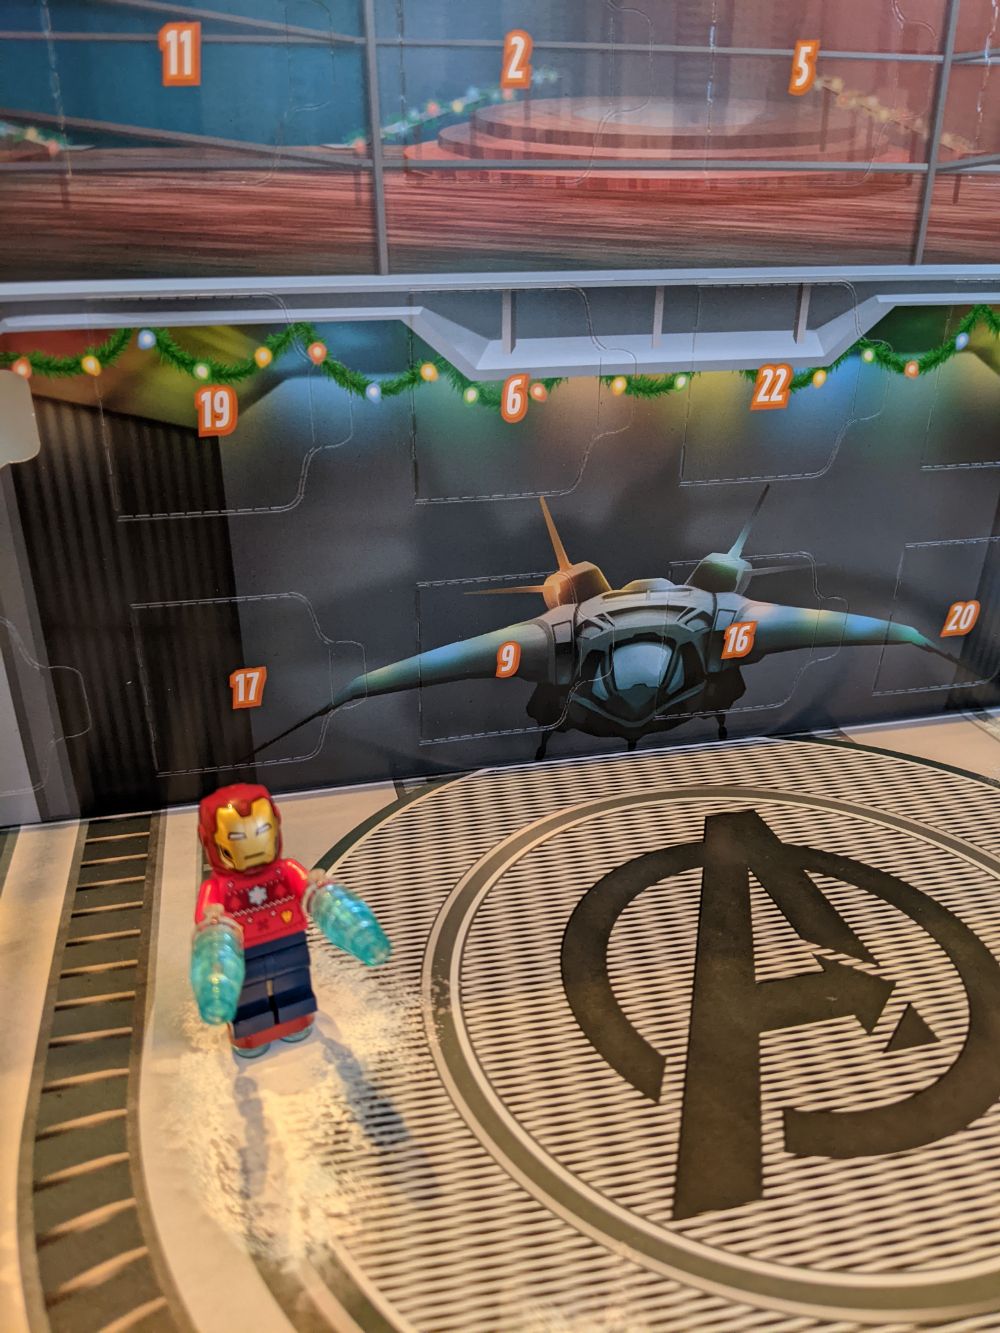 A backdrop of the Avengers hangar with a Quinn Jet in the background, and Iron Man in the front, taken from the first day of the advent calendar. Iron Man is wearing his helmet, has a Christmas jumper with the arc reactor on, is slightly floating in mid-air and has his hand weapons primed